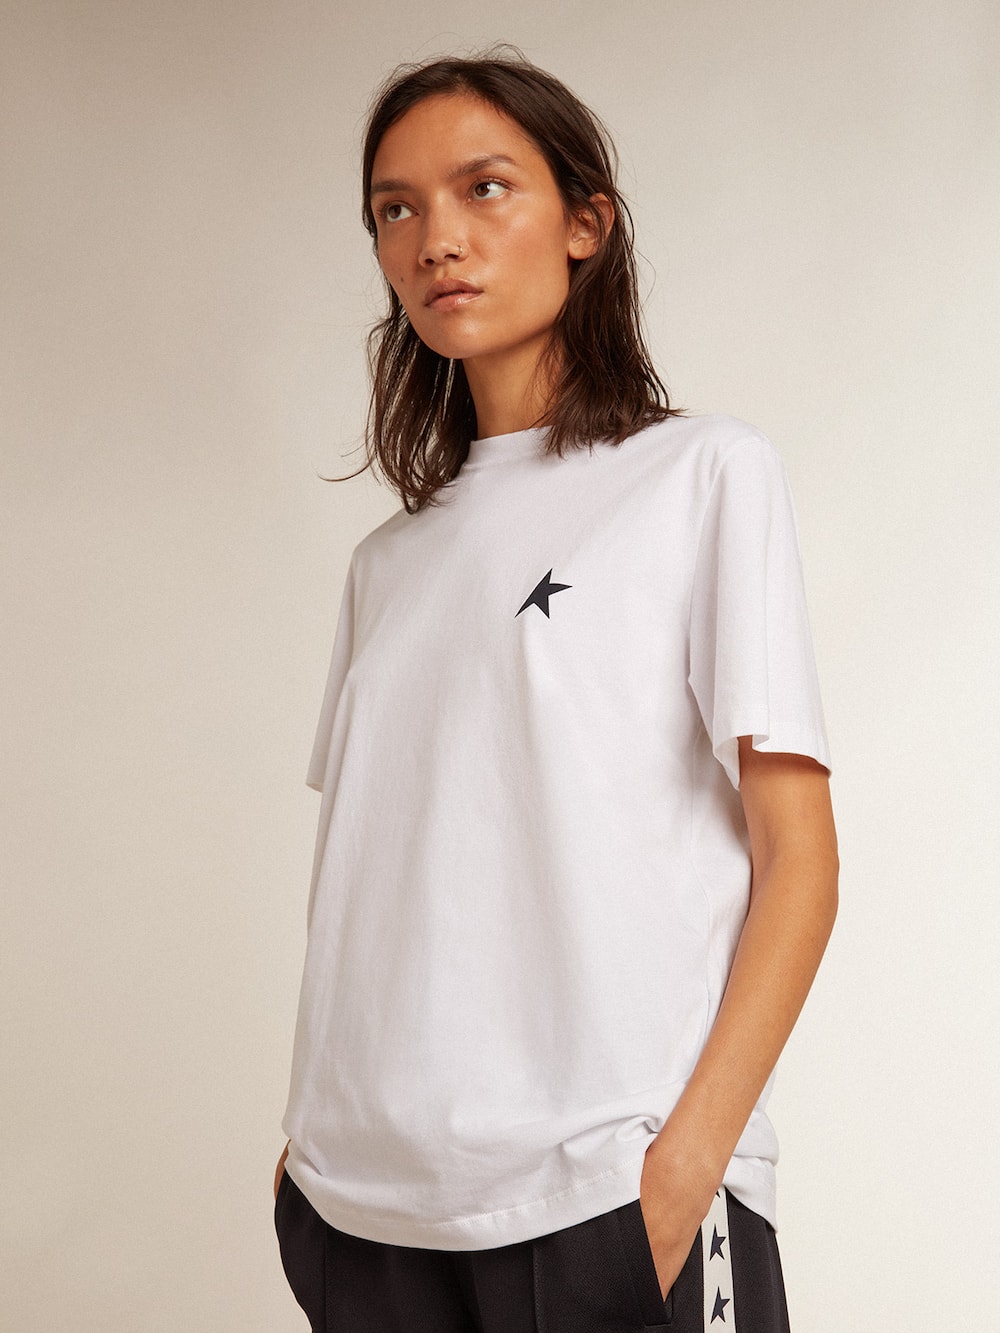 Golden Goose - Women’s white T-shirt with dark blue star on the front in 